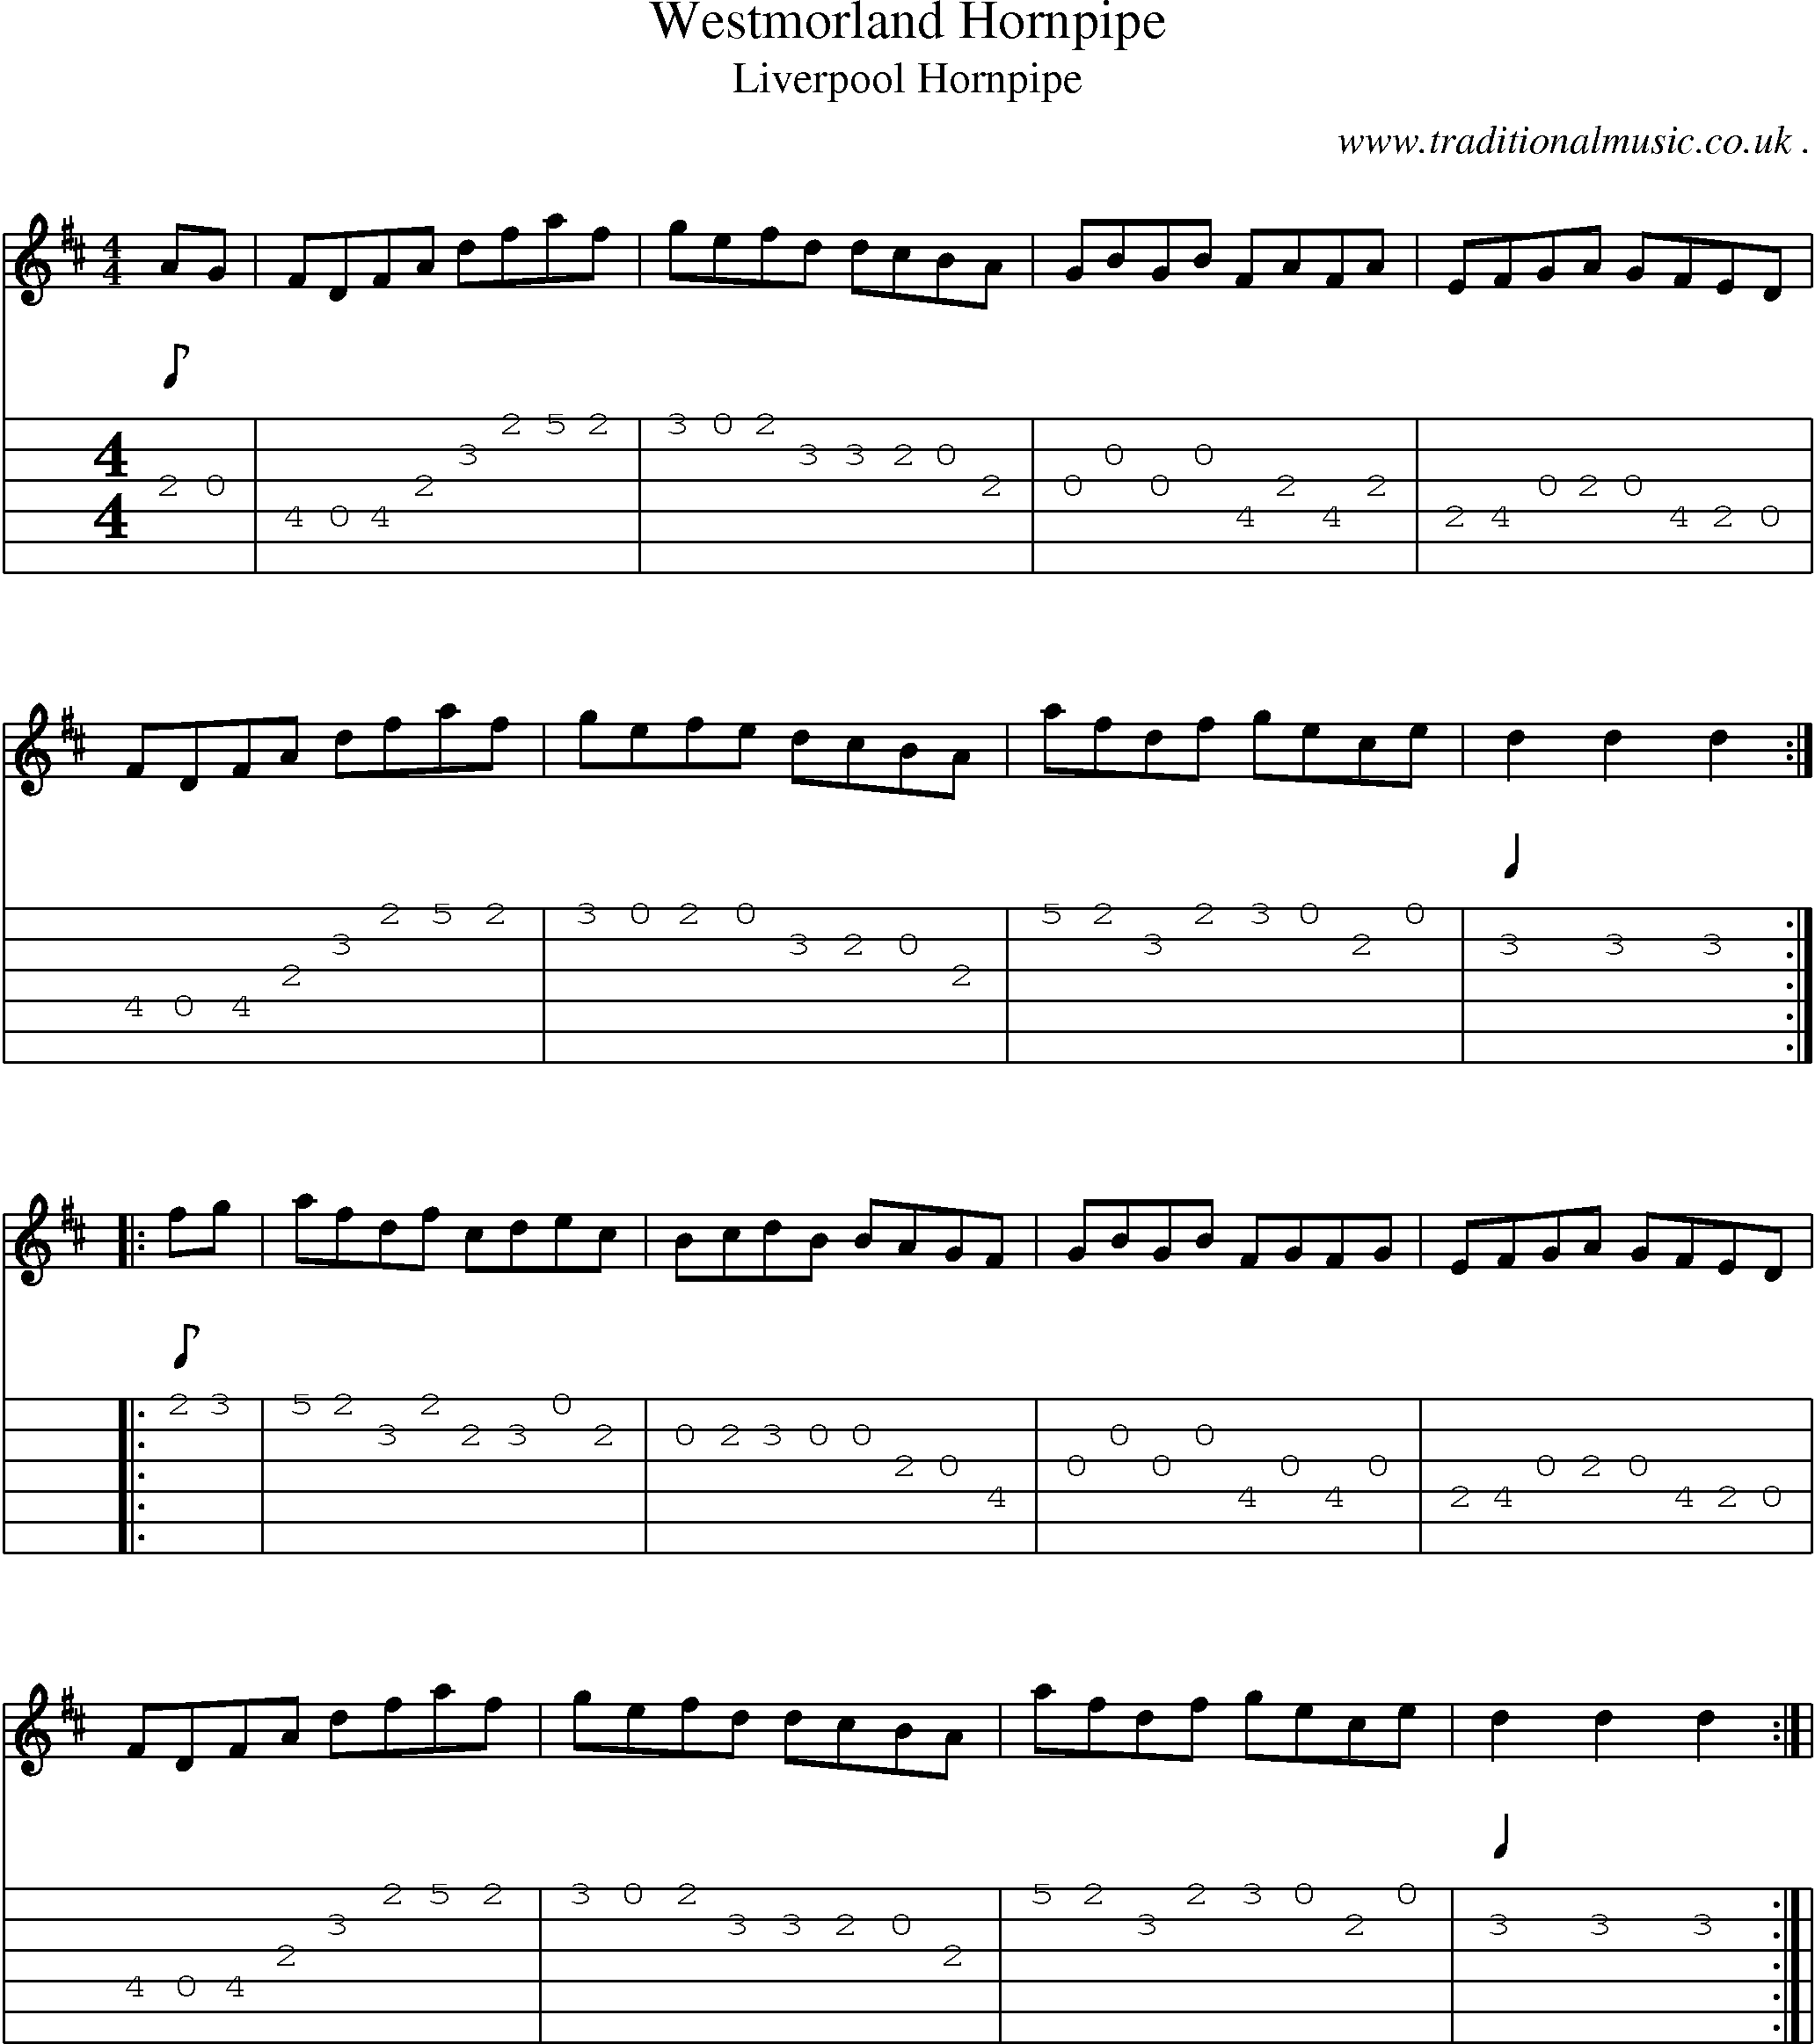 Sheet-Music and Guitar Tabs for Westmorland Hornpipe